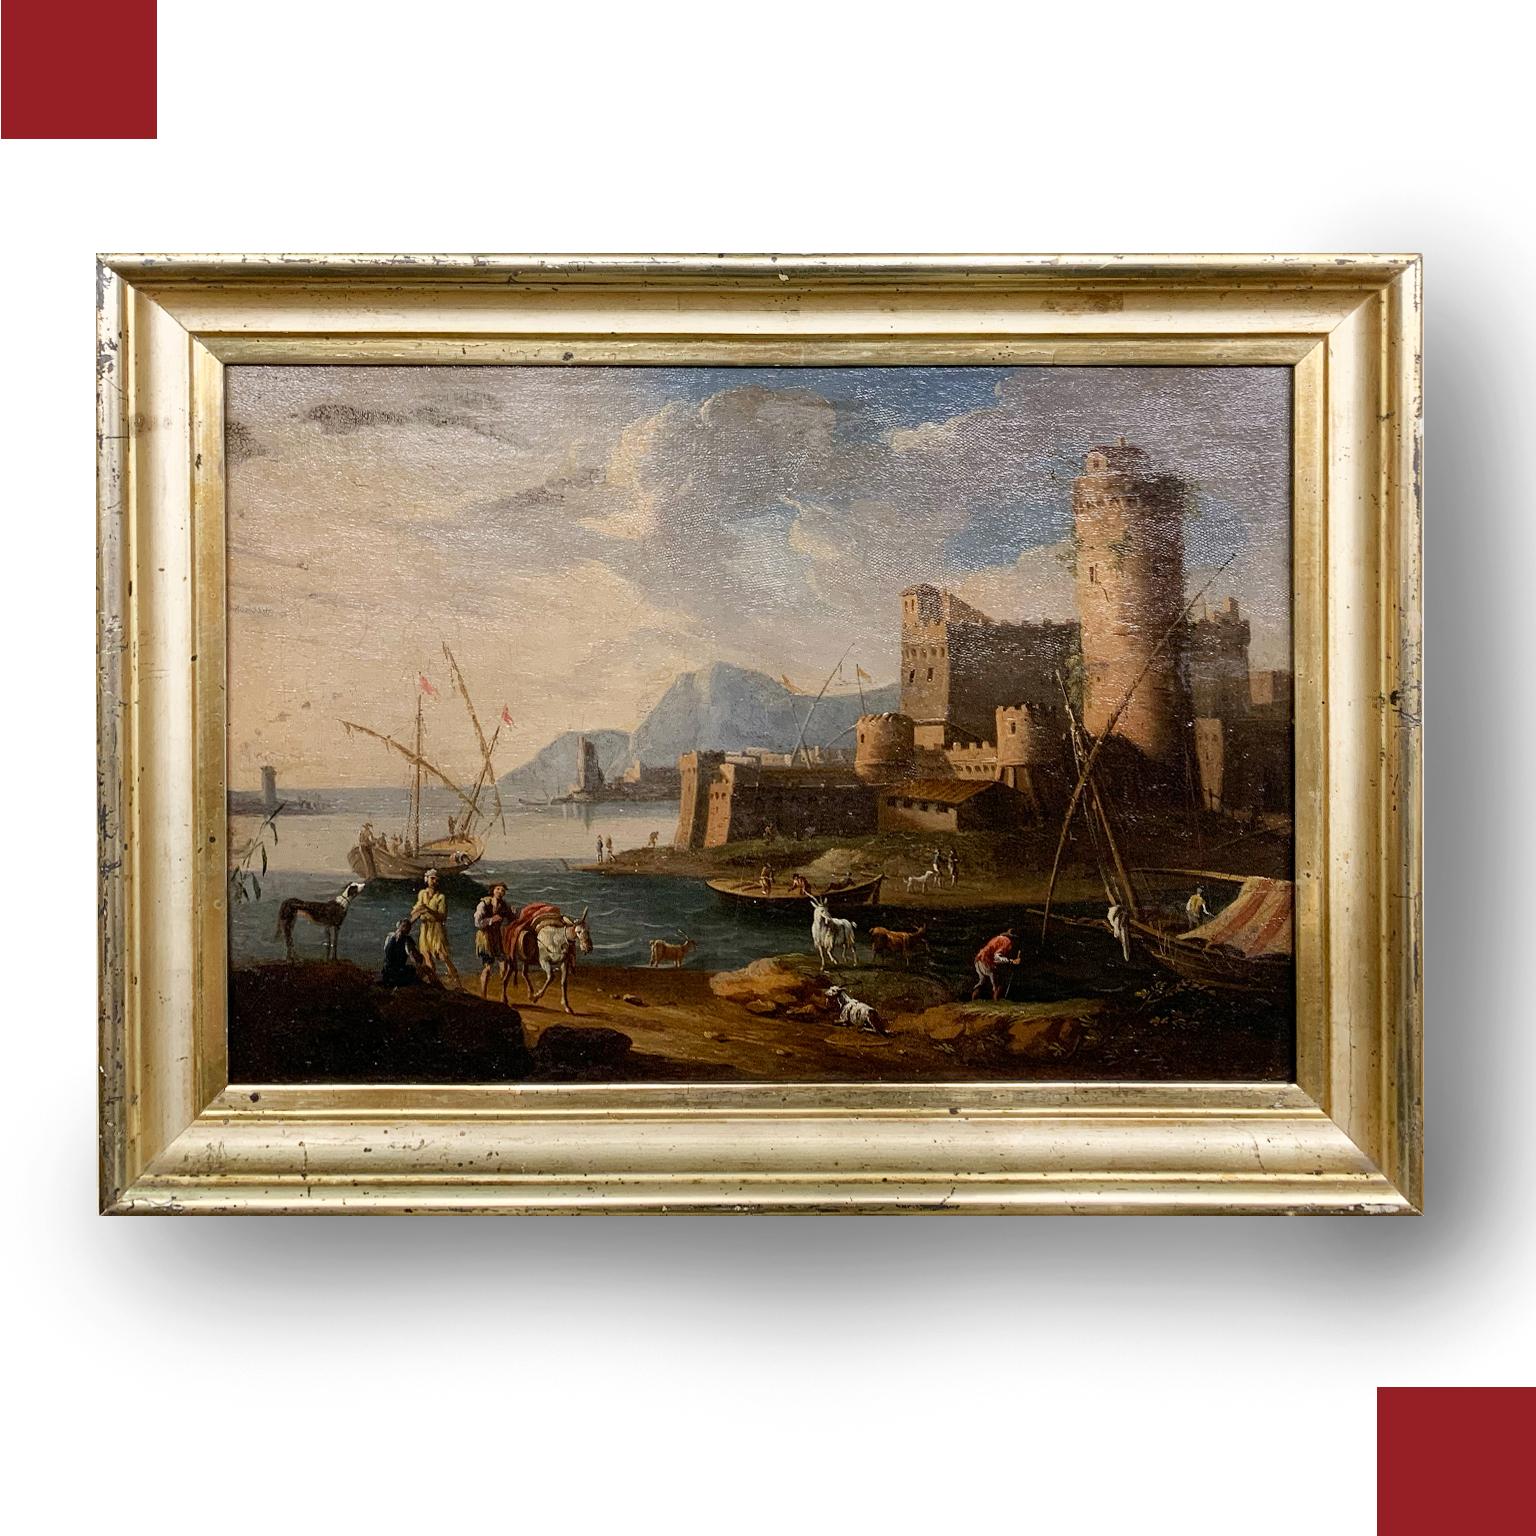 Beautiful oil painting on canvas from the early 1700s depicting a Venetian landscape with port, figures and castle. The manufacture is Venetian and can be attributed to the school of Jacob De Heusch. Within a gilt wood frame.